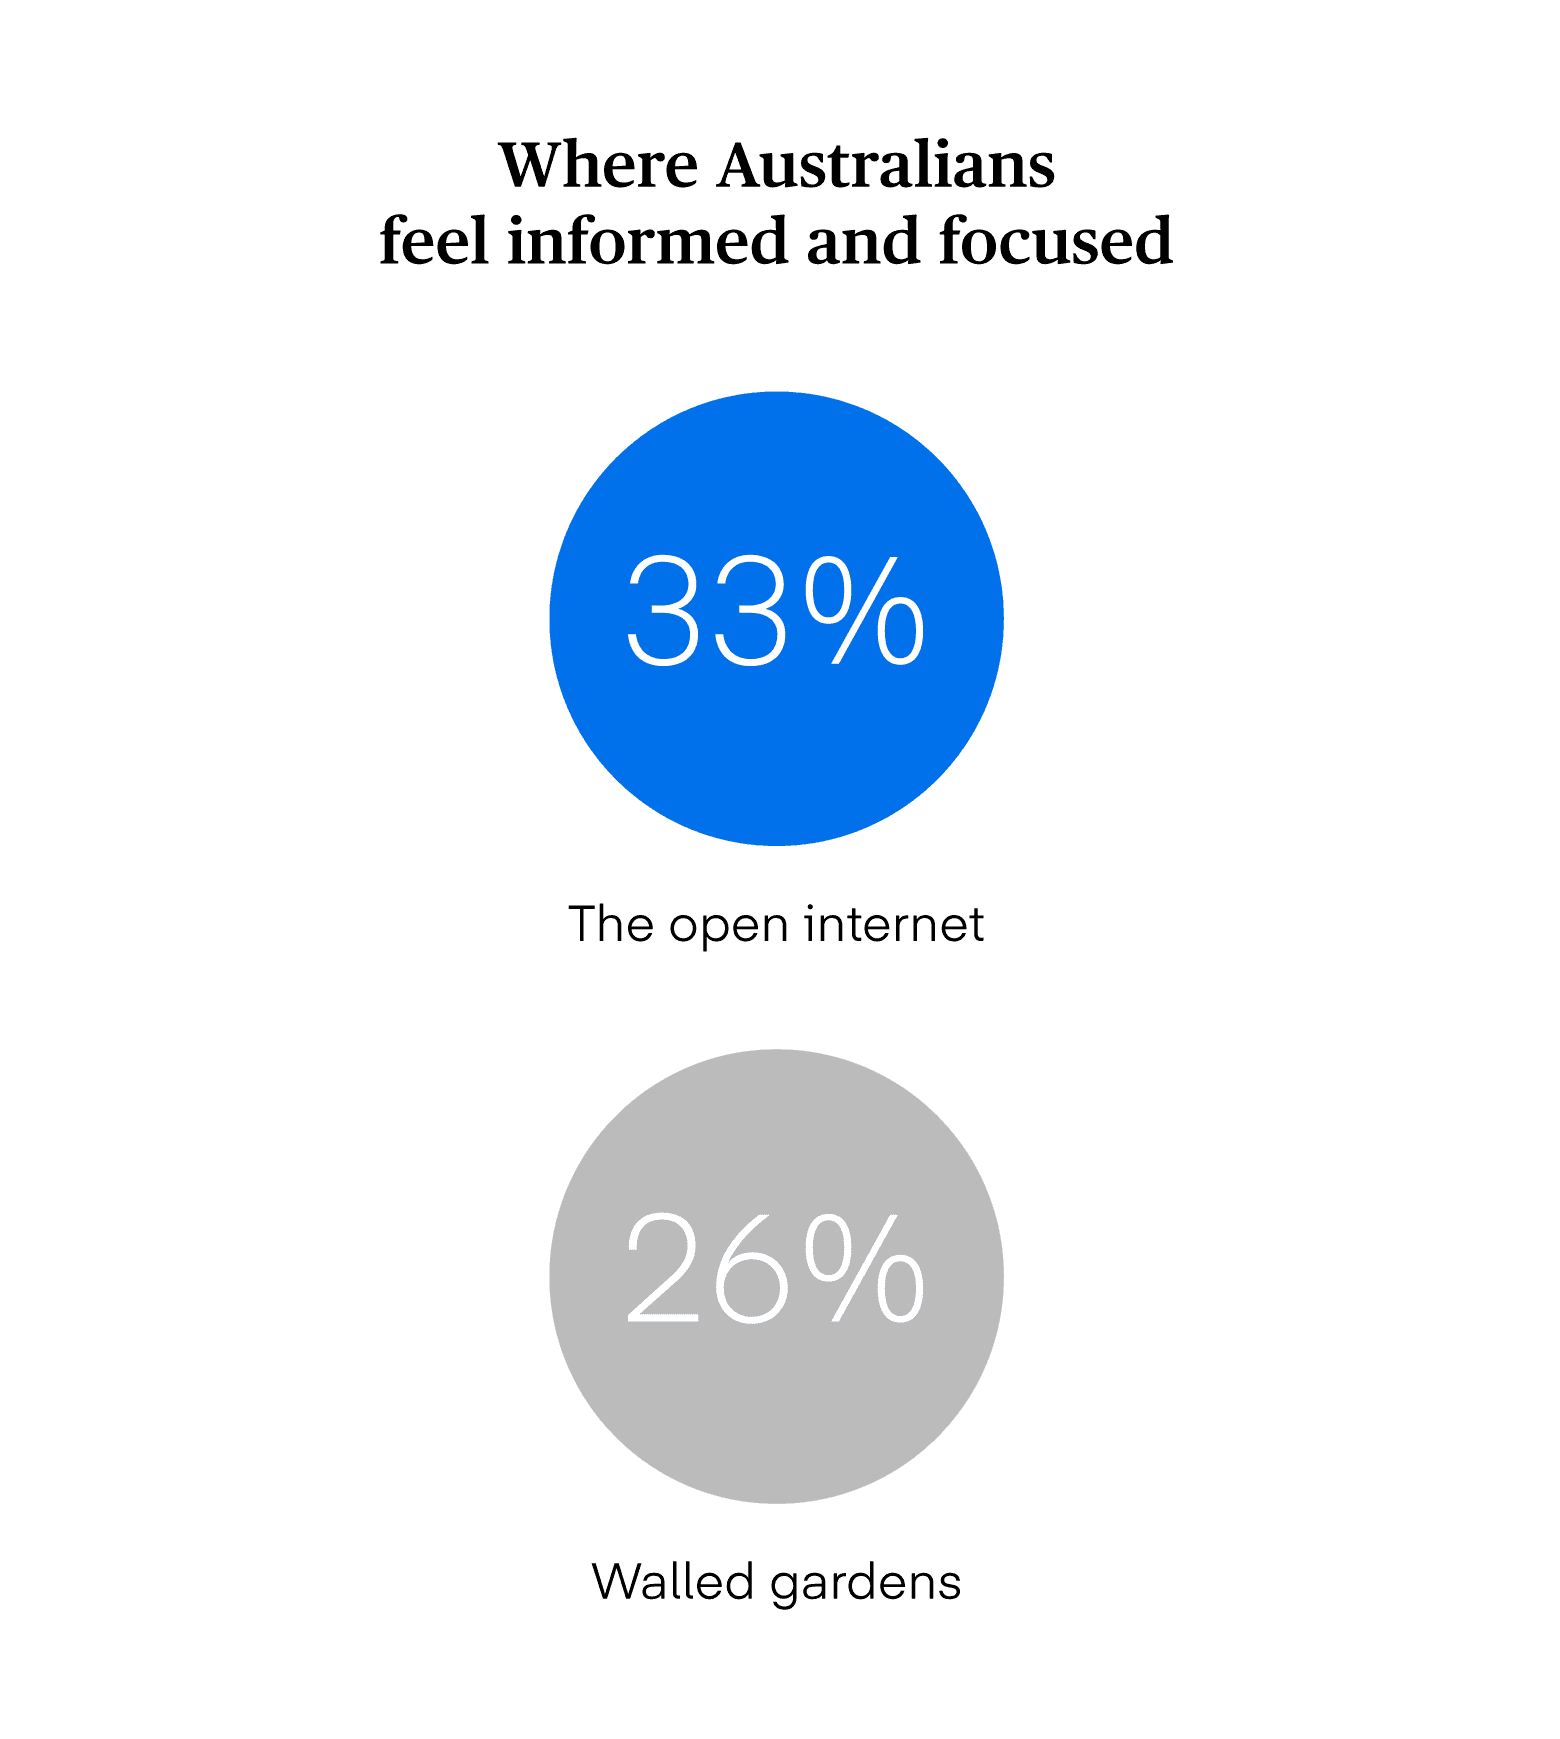 Data visualization displaying "Where are Australians engaged online"